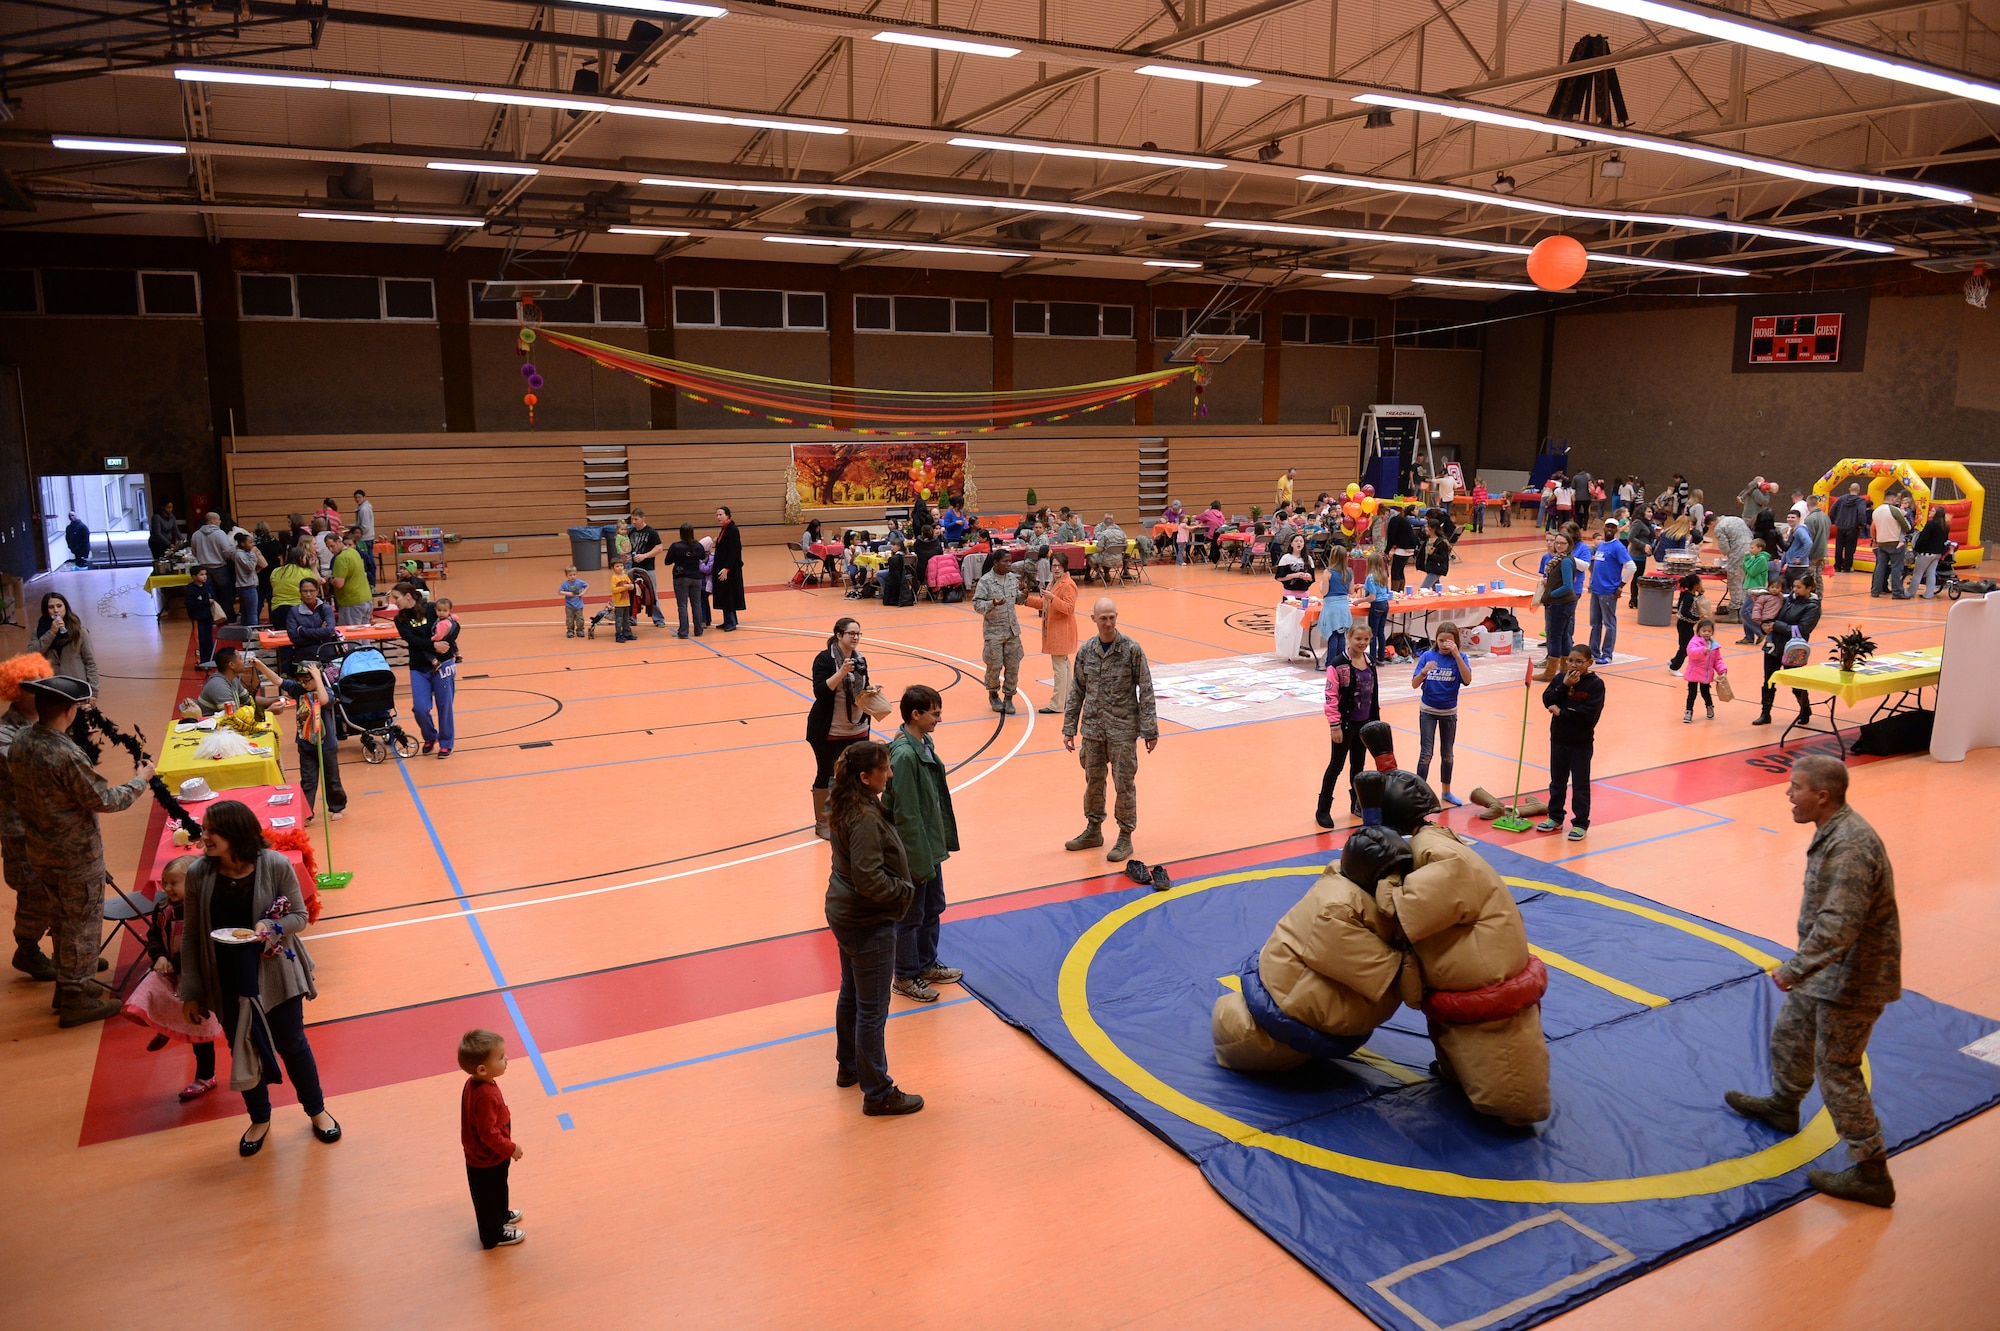 More than 300 people attended the second annual Spangtacular Family Fall Festival Nov. 21, 2014, in the Skelton Memorial Fitness Center at Spangdahlem Air Base, Germany. The event offered the Spangdahlem community a chance to get together for free food, prizes and games to foster camaraderie and spiritual resiliency. (U.S. Air Force photo by Staff Sgt. Daryl Knee/Released)